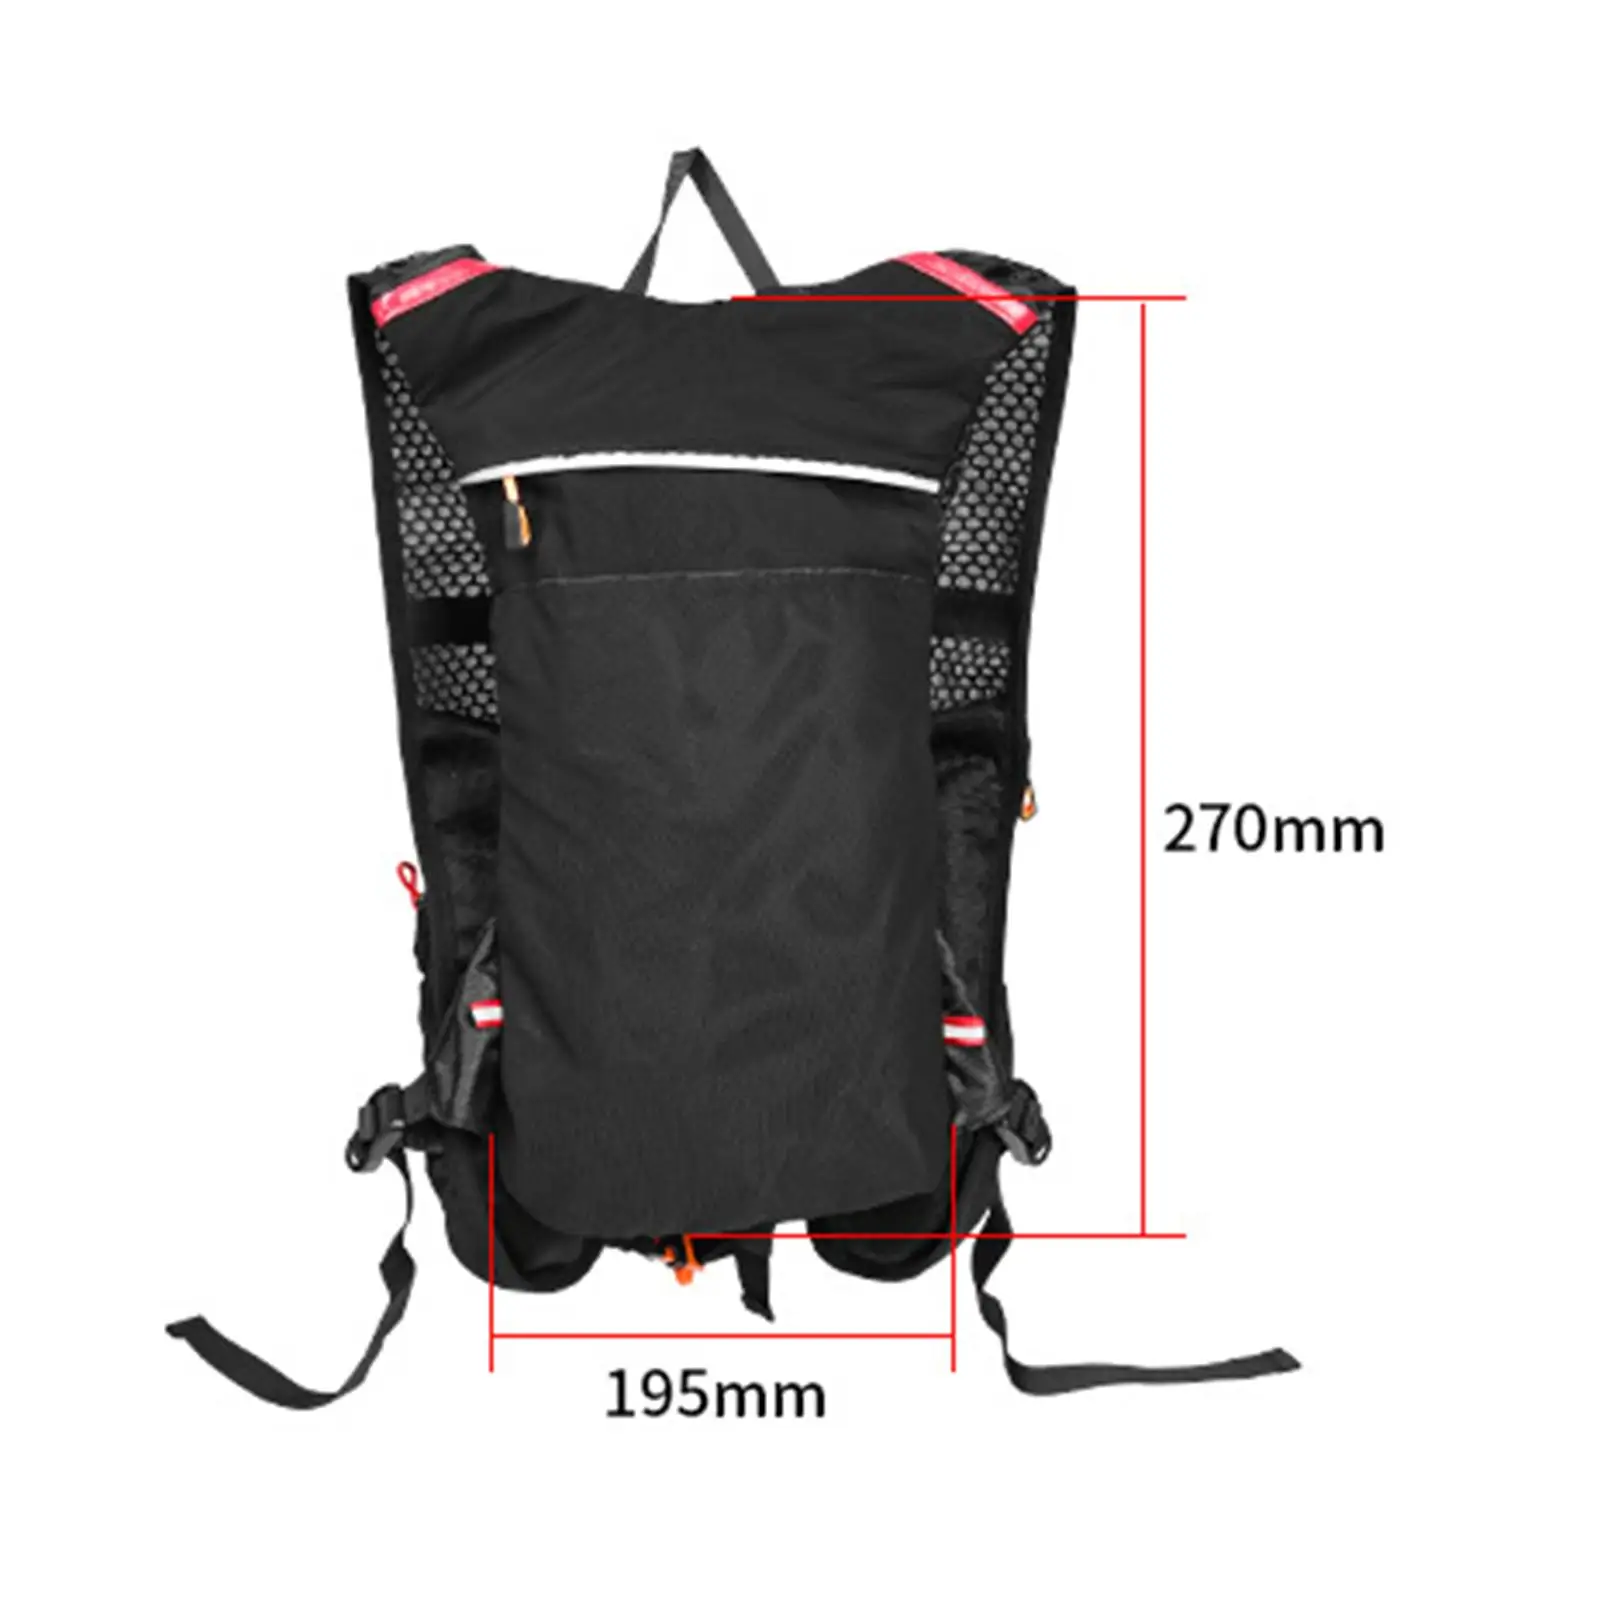 Hydration Backpack Rucksack with Straps Nylon Waterproof Daypack Knapsack for Running Outdoor Traveling Backpacking Adventure